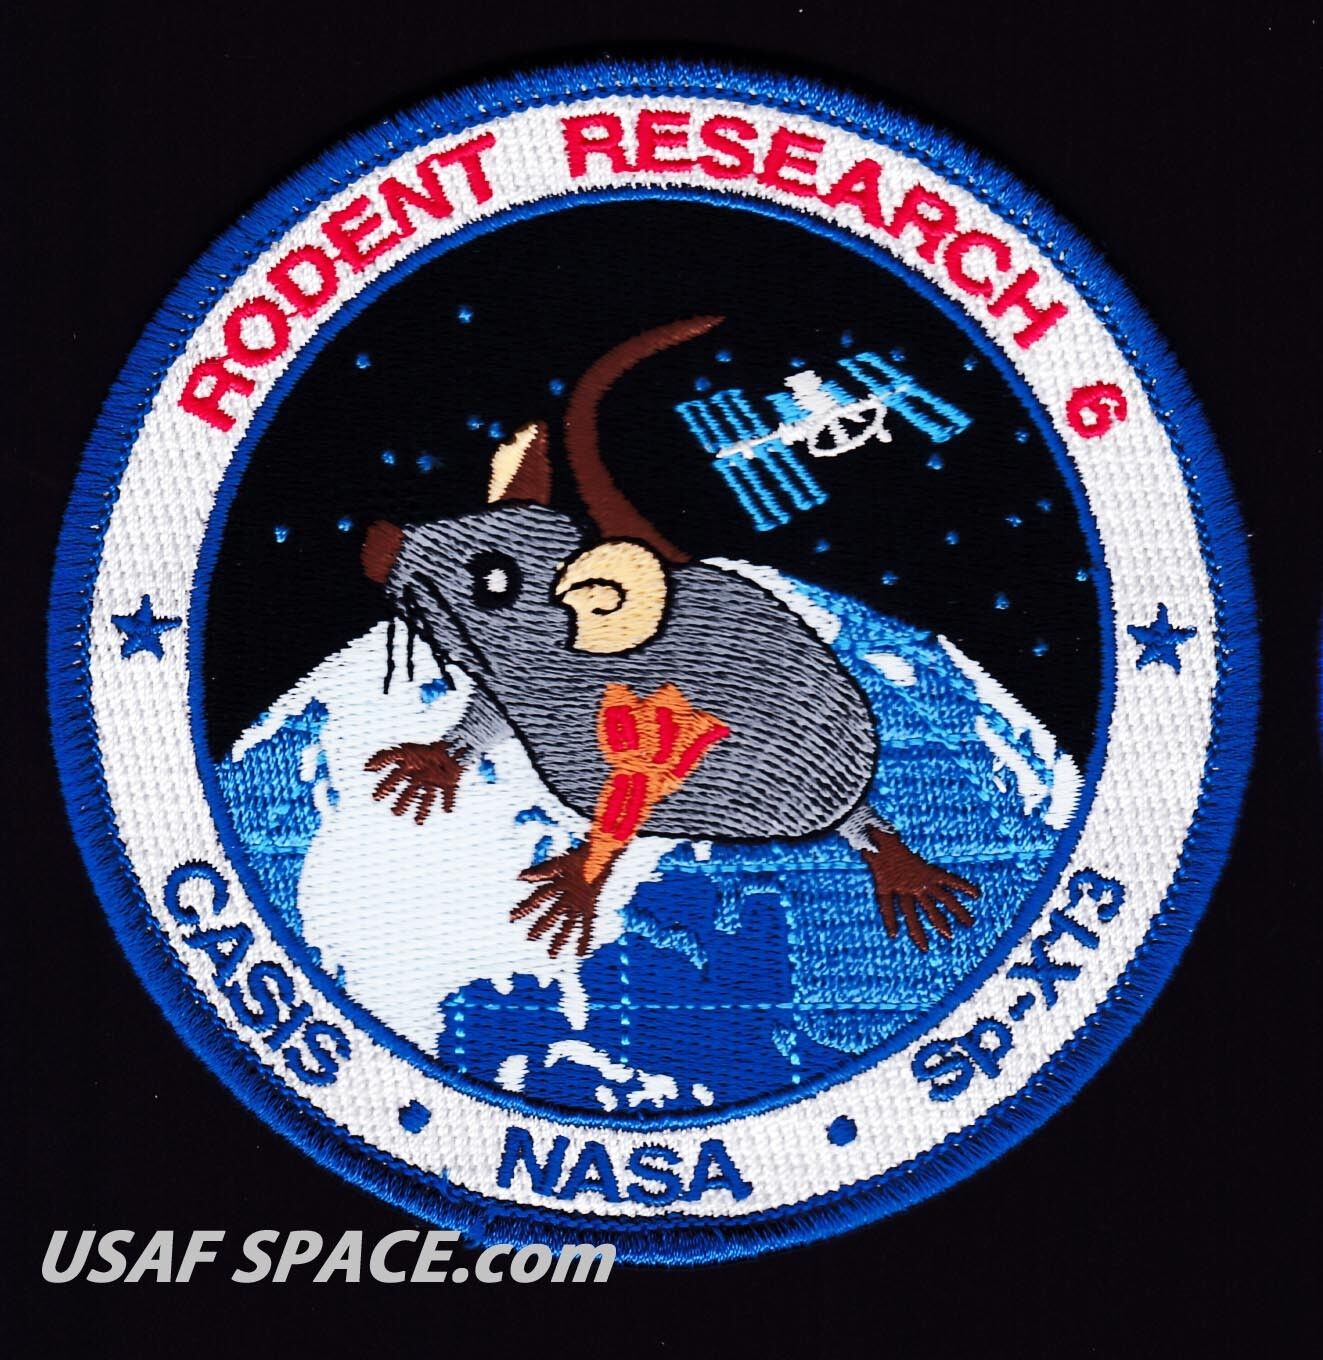 RODENT RESEARCH 6 -SPACEX DRAGON CRS-13- ISS NASA CASIS 4\